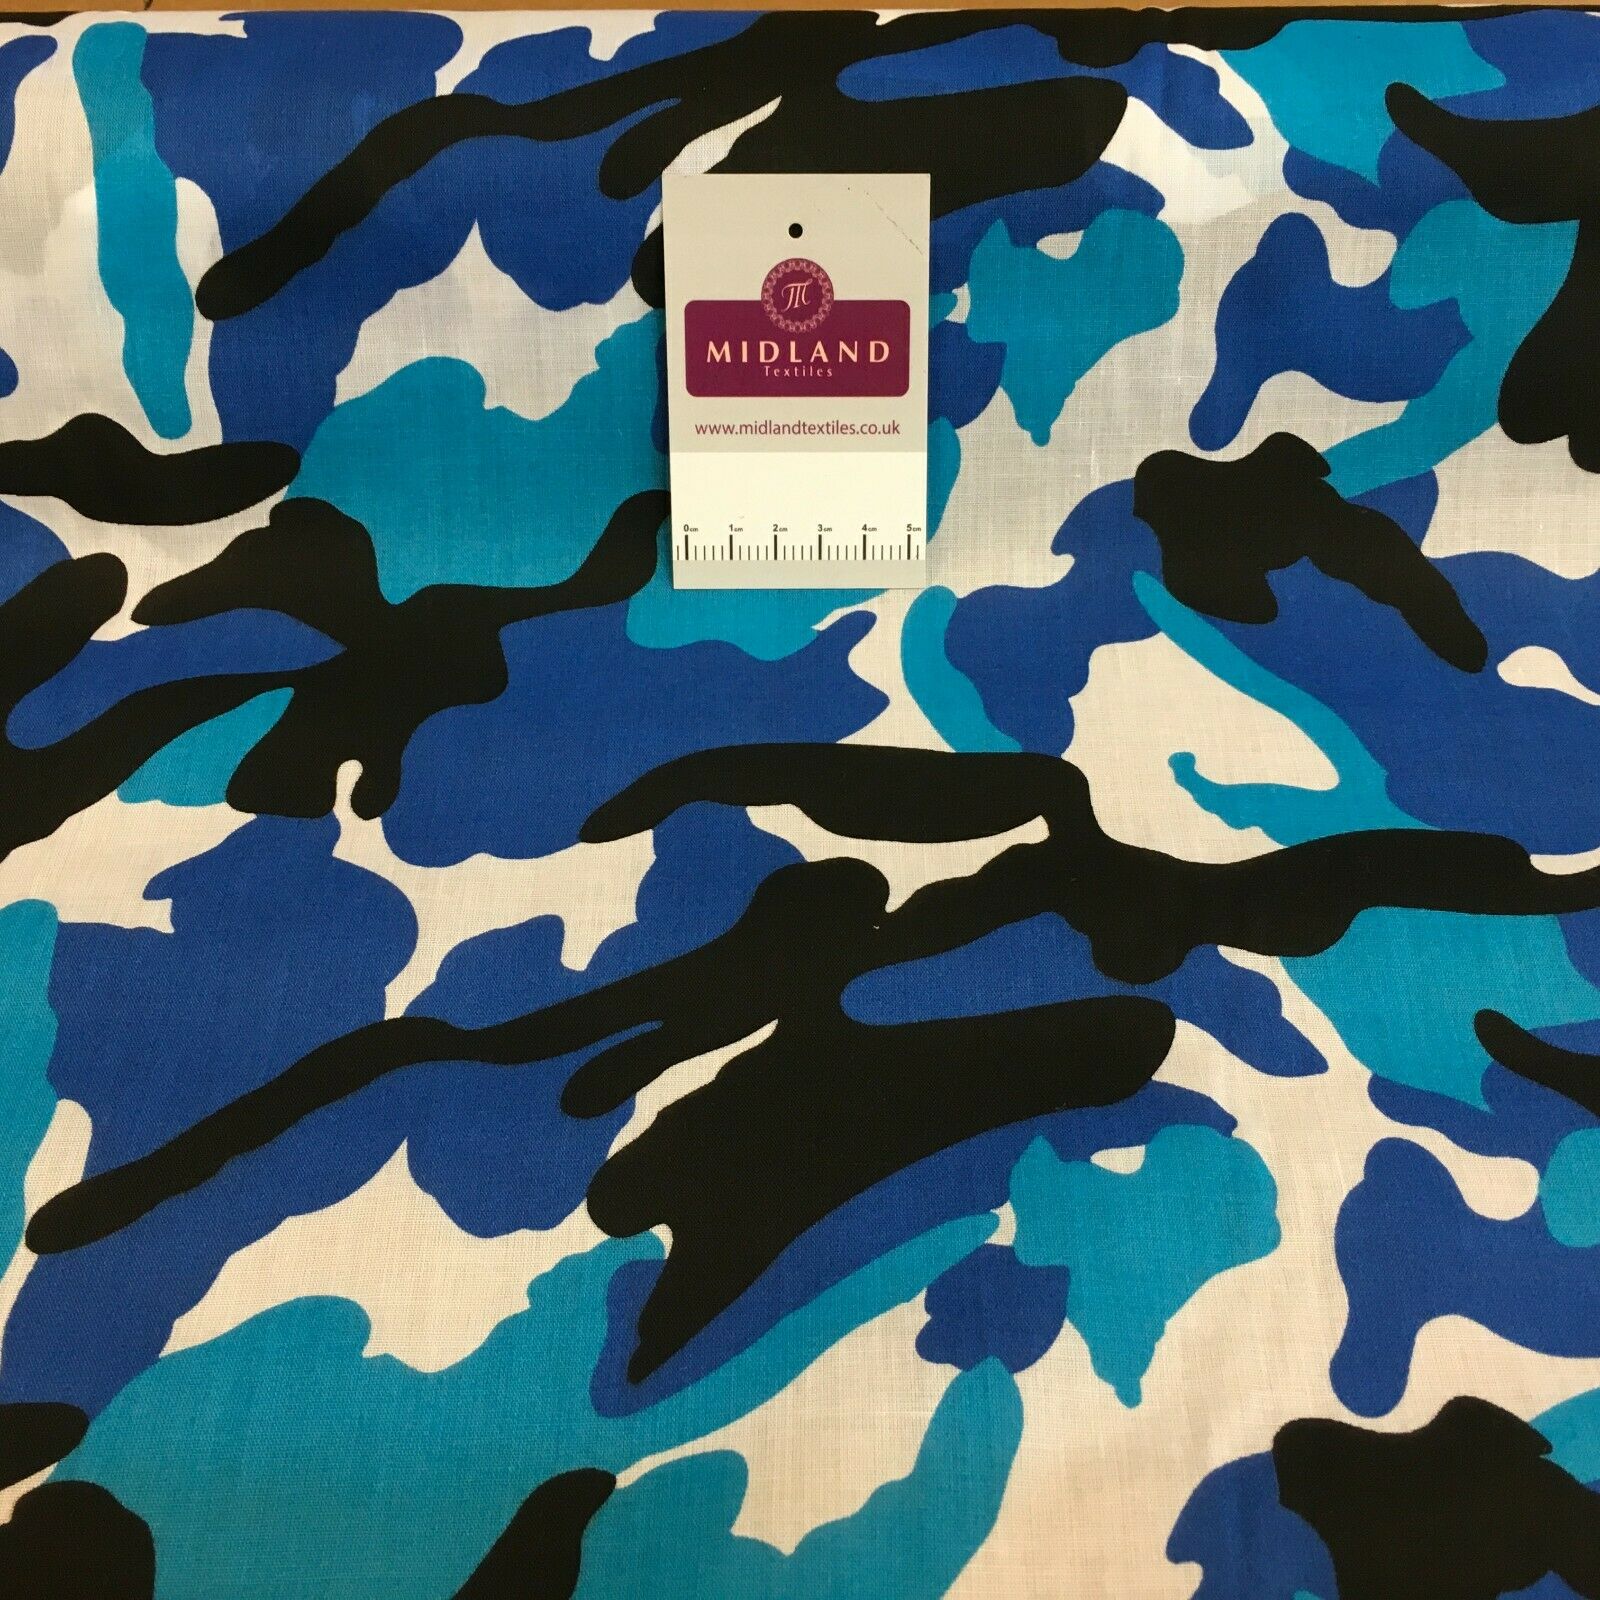 Blue Camouflage 100% Cotton Material - Survival General